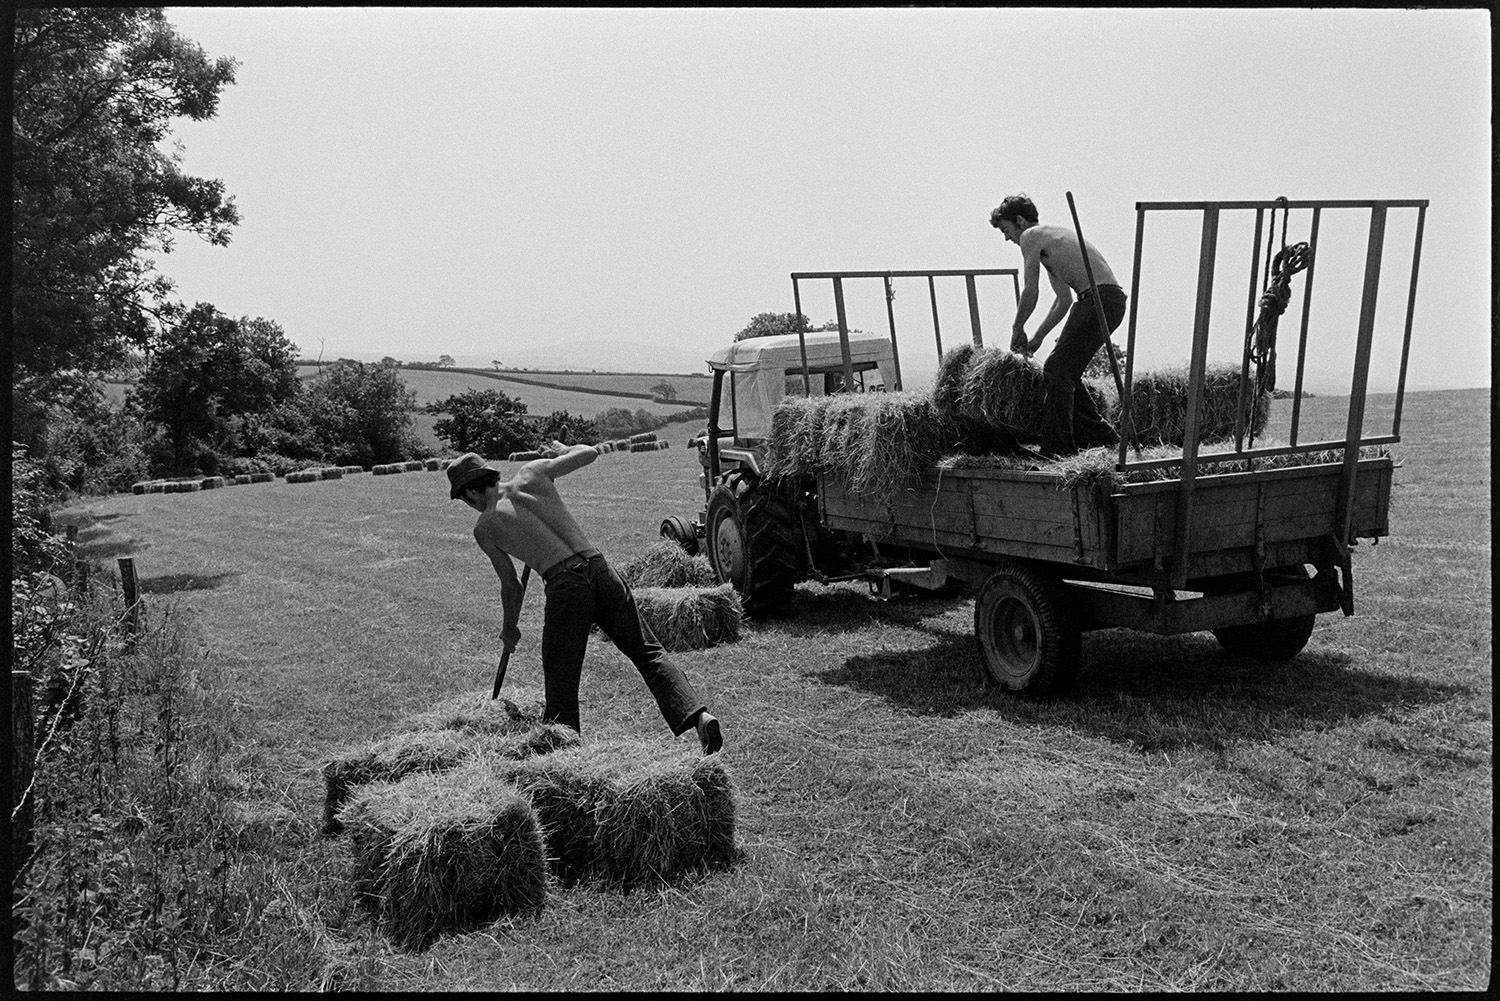 David Ward and Graham Ward loading hay bales onto a trailer in a field at Parsonage, Iddesleigh. One of the men is picking up a bale with a pitchfork. More bales can be seen in the field in the background.